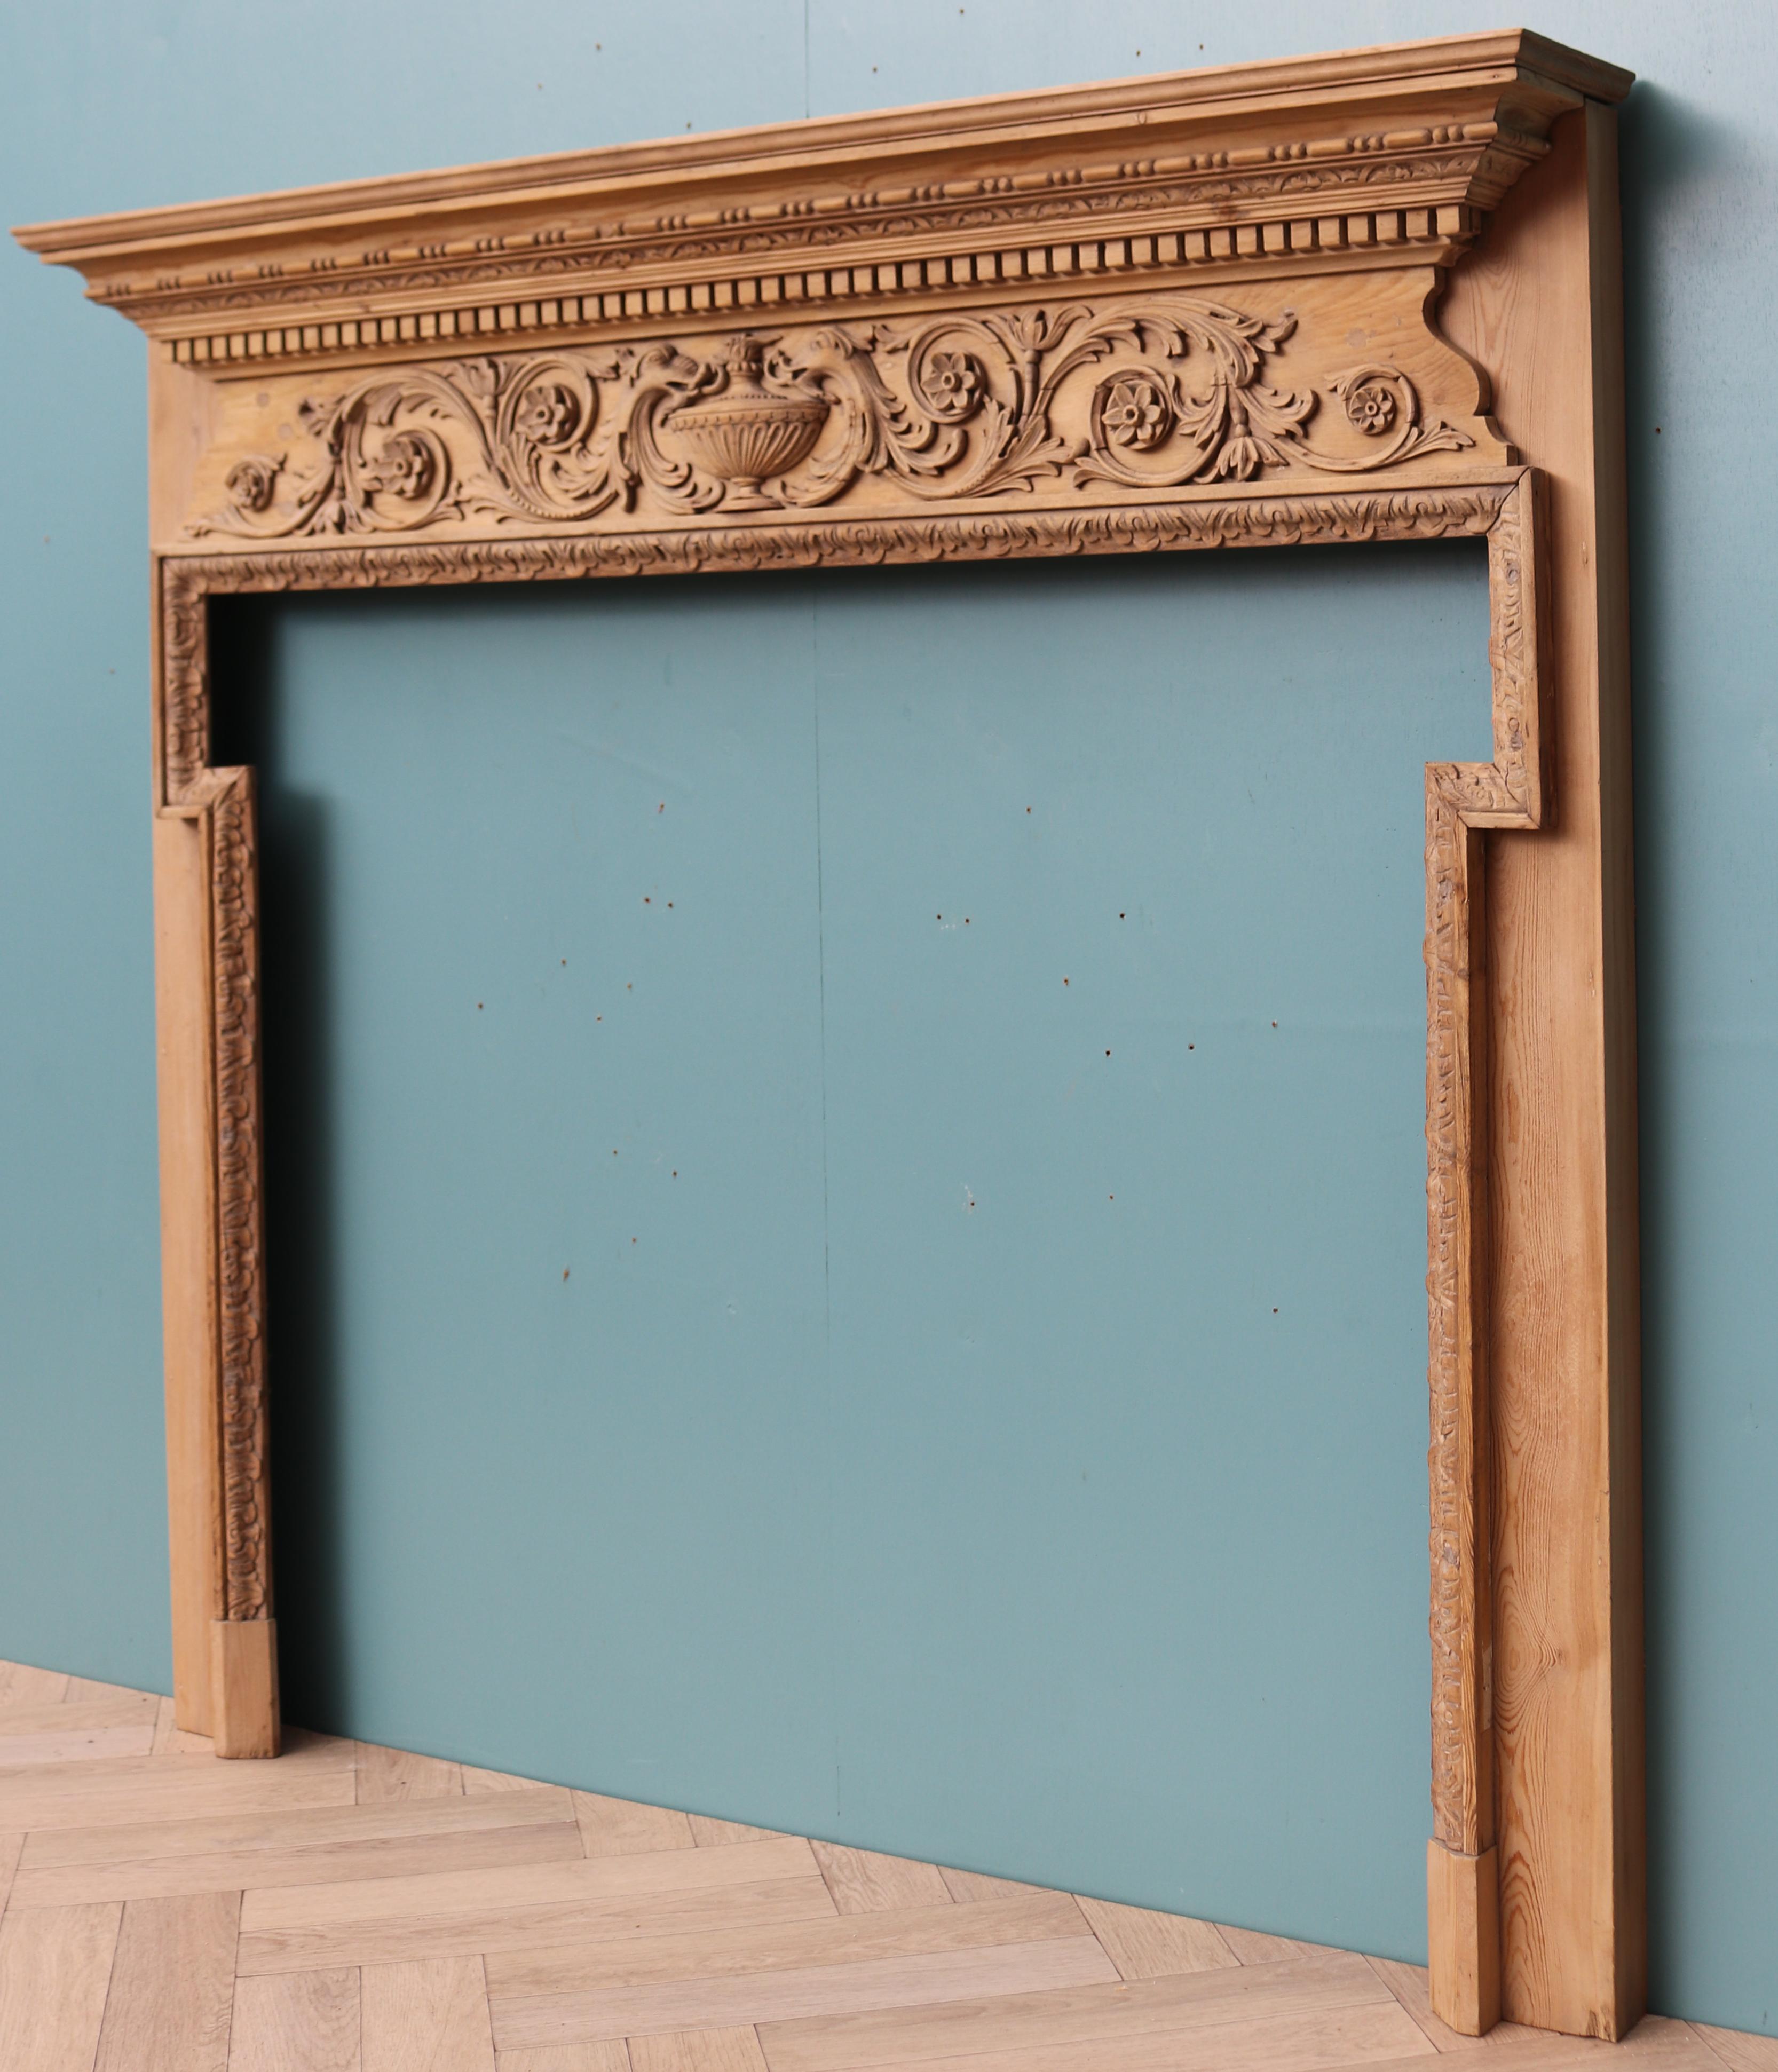 A Late Georgian style carved pine fire surround, the frieze depicting foliage and mythical creatures, centred by an urn.

Additional Dimensions:

Opening Height 104 cm

Opening Width 112-123 cm

Width between outside of the foot blocks 139